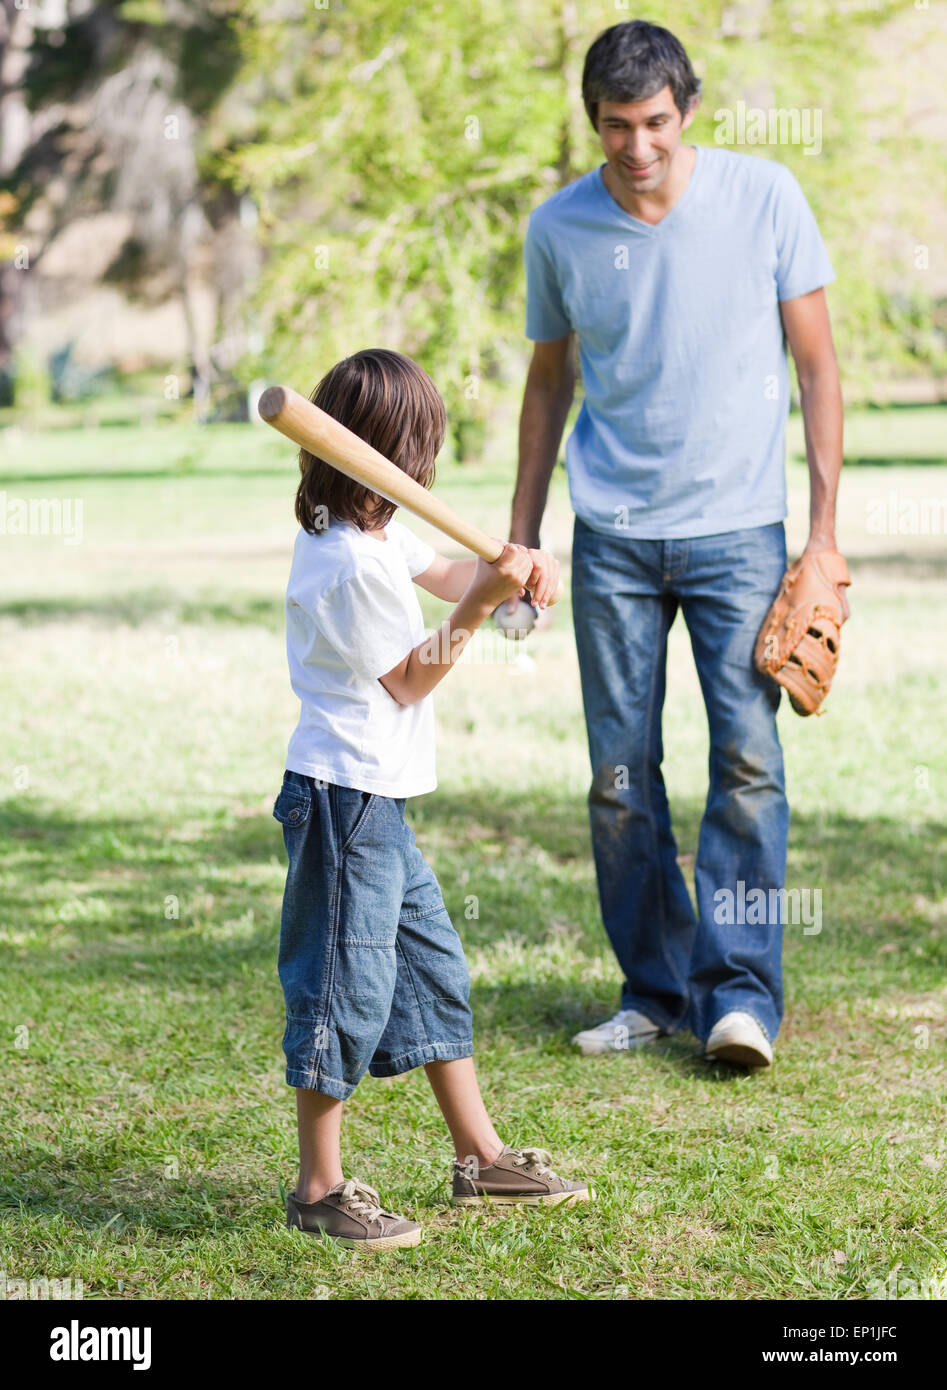 Cute little boy playing baseball with his father Stock Photo